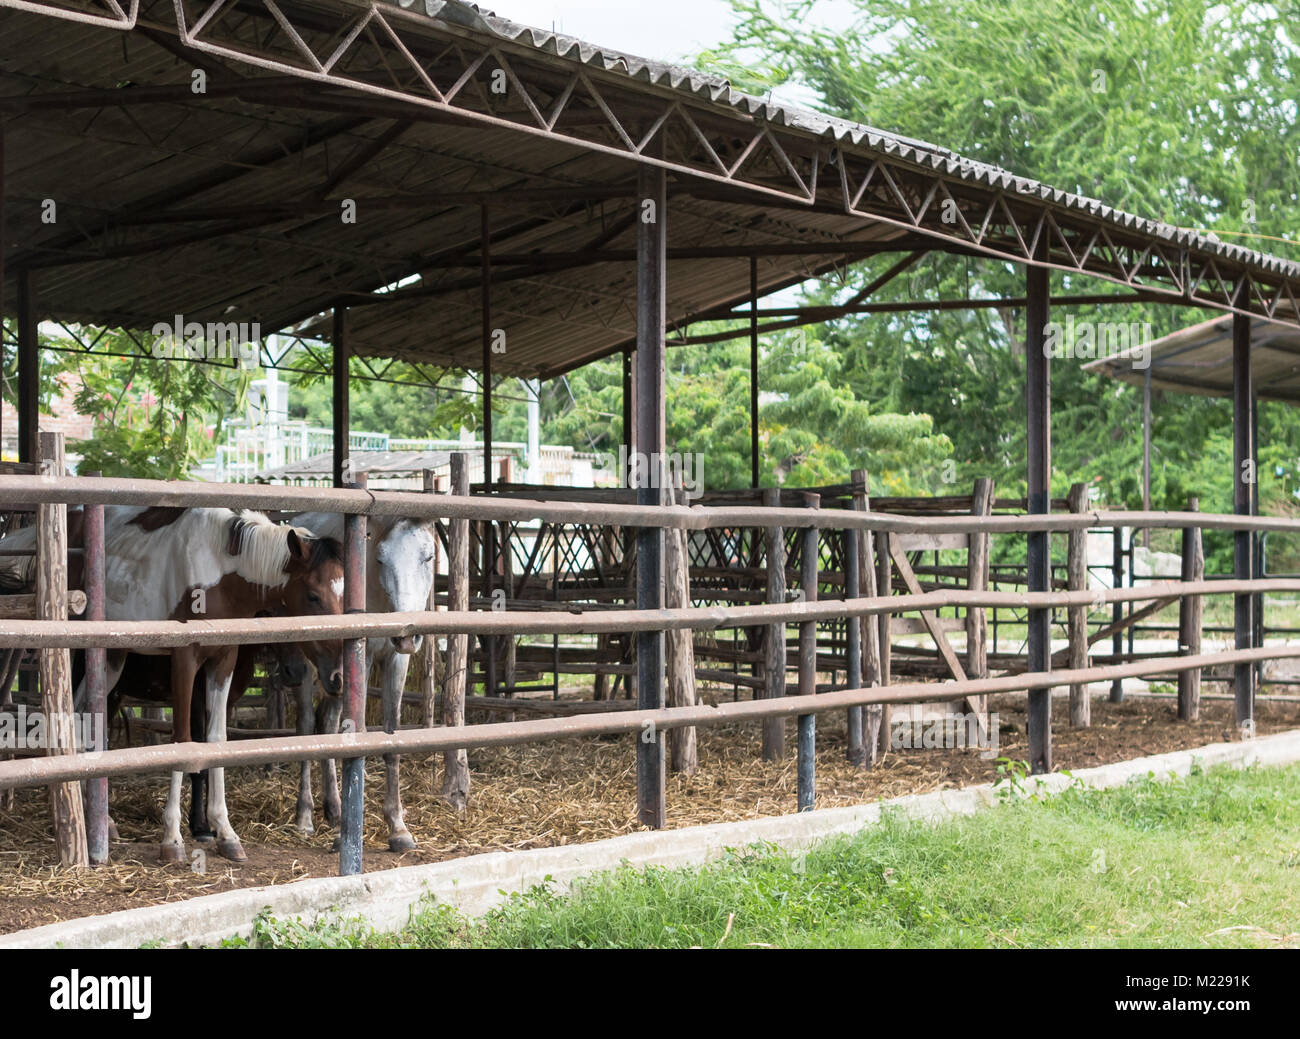 Las Tunas, Cuba - September 4, 2017: Emaciated horses huddled together in a single stall at the city fairgrounds. Stock Photo